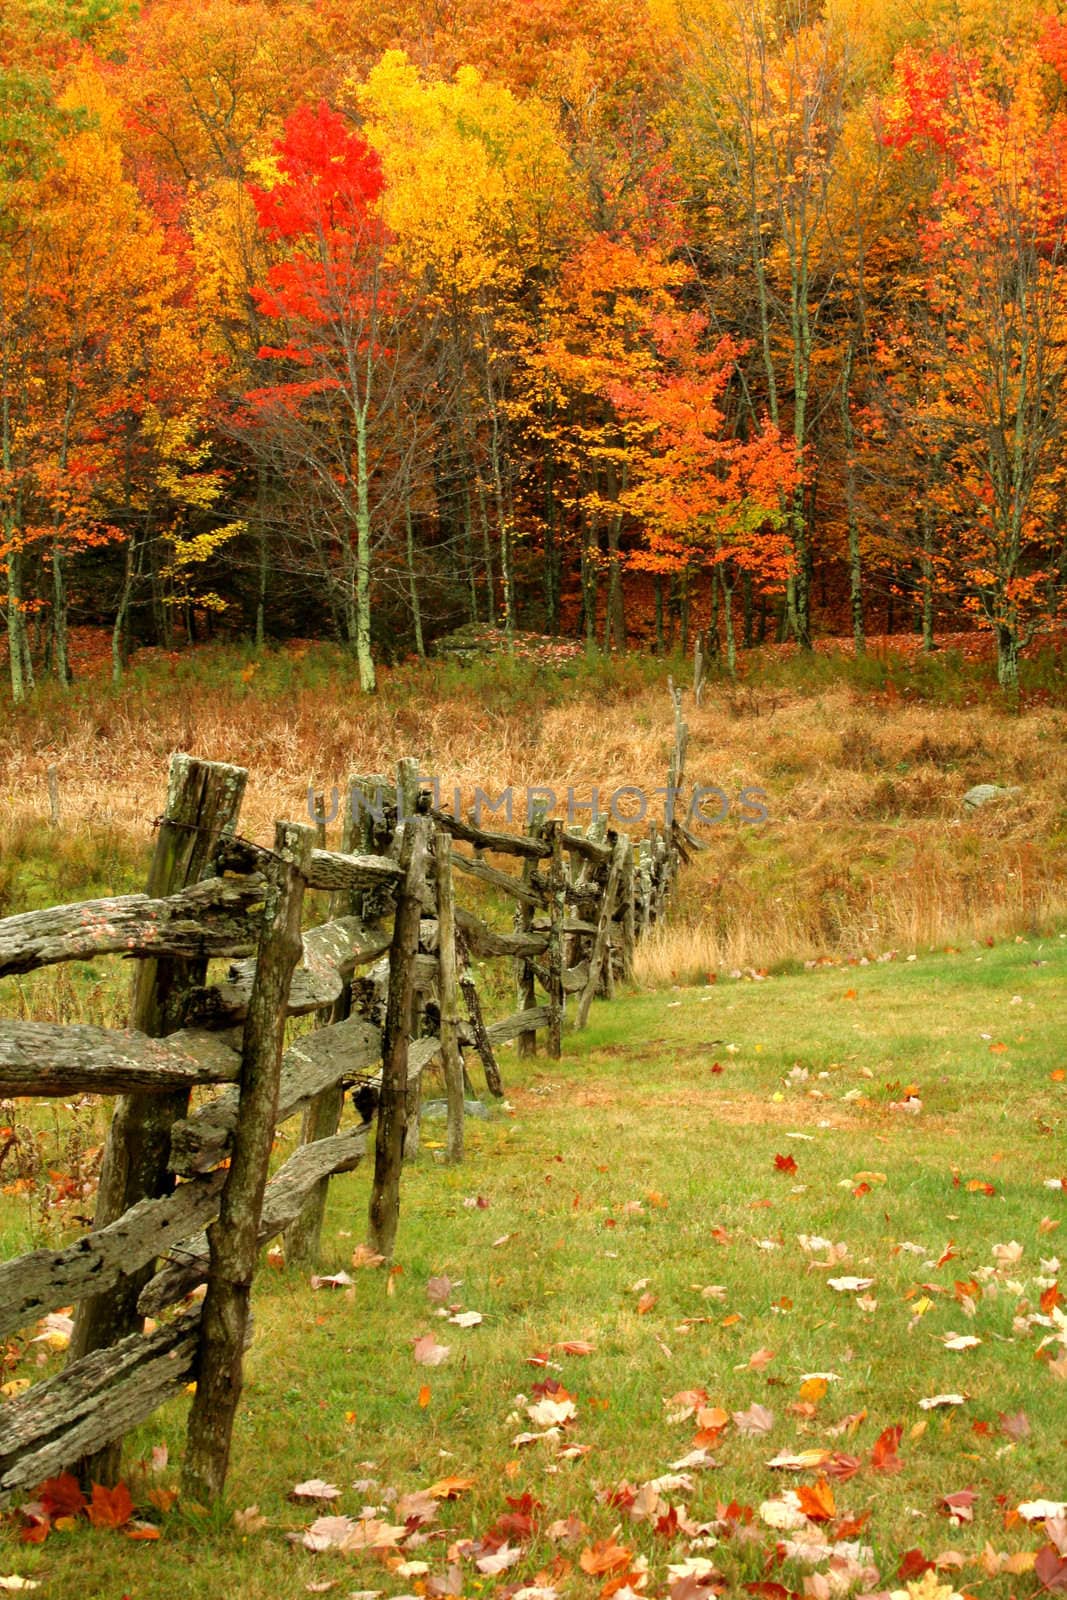 An old wooden fence leading the viewer into the colorfull woods during Autumn.
